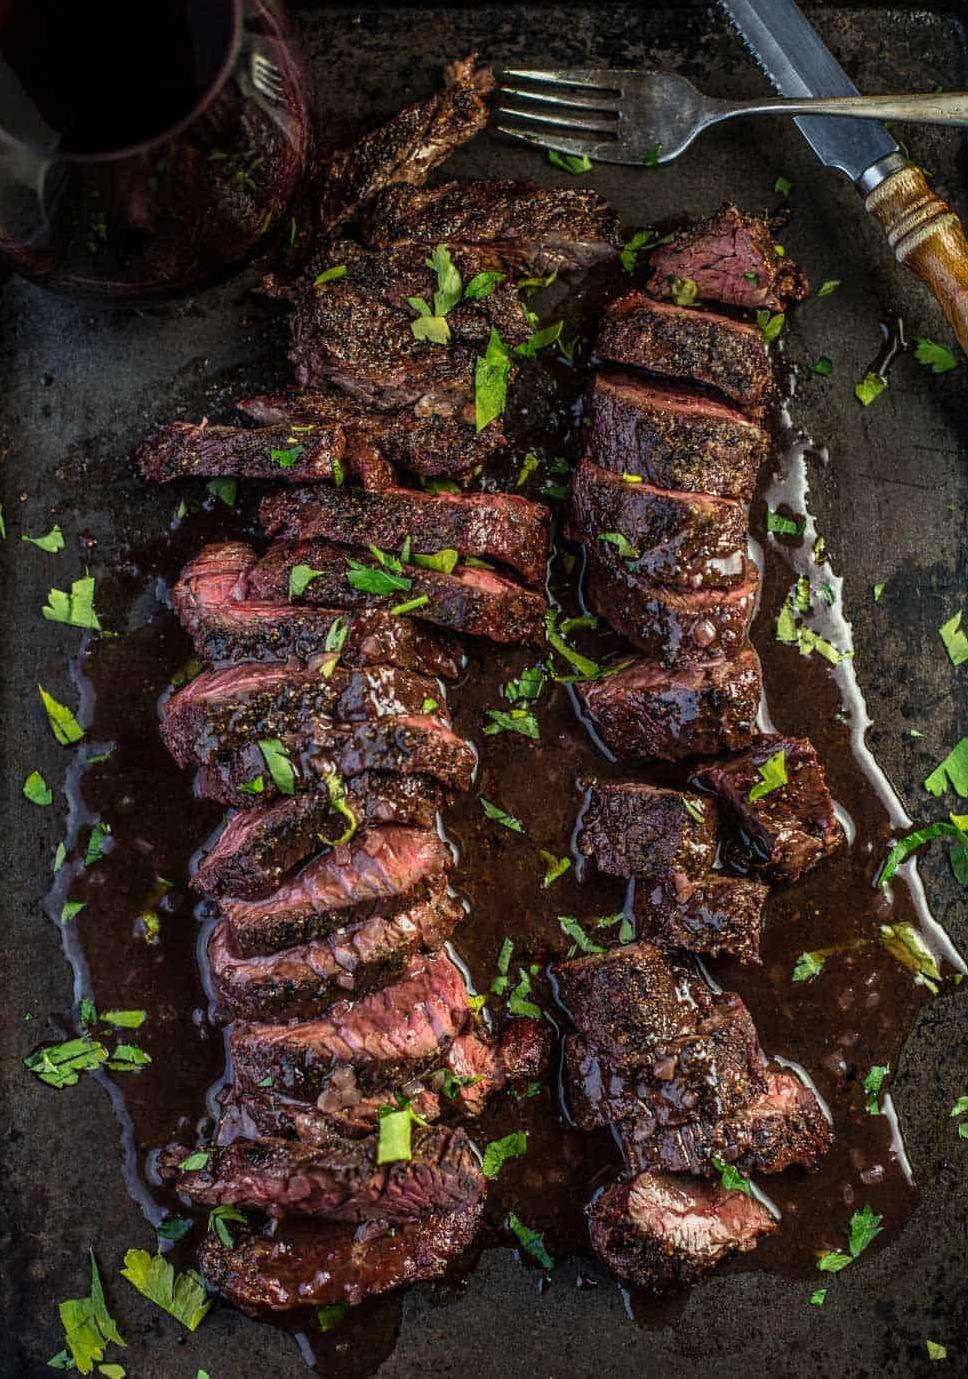  Sizzling-hot and juicy skirt steak with a flavorful red wine sauce.